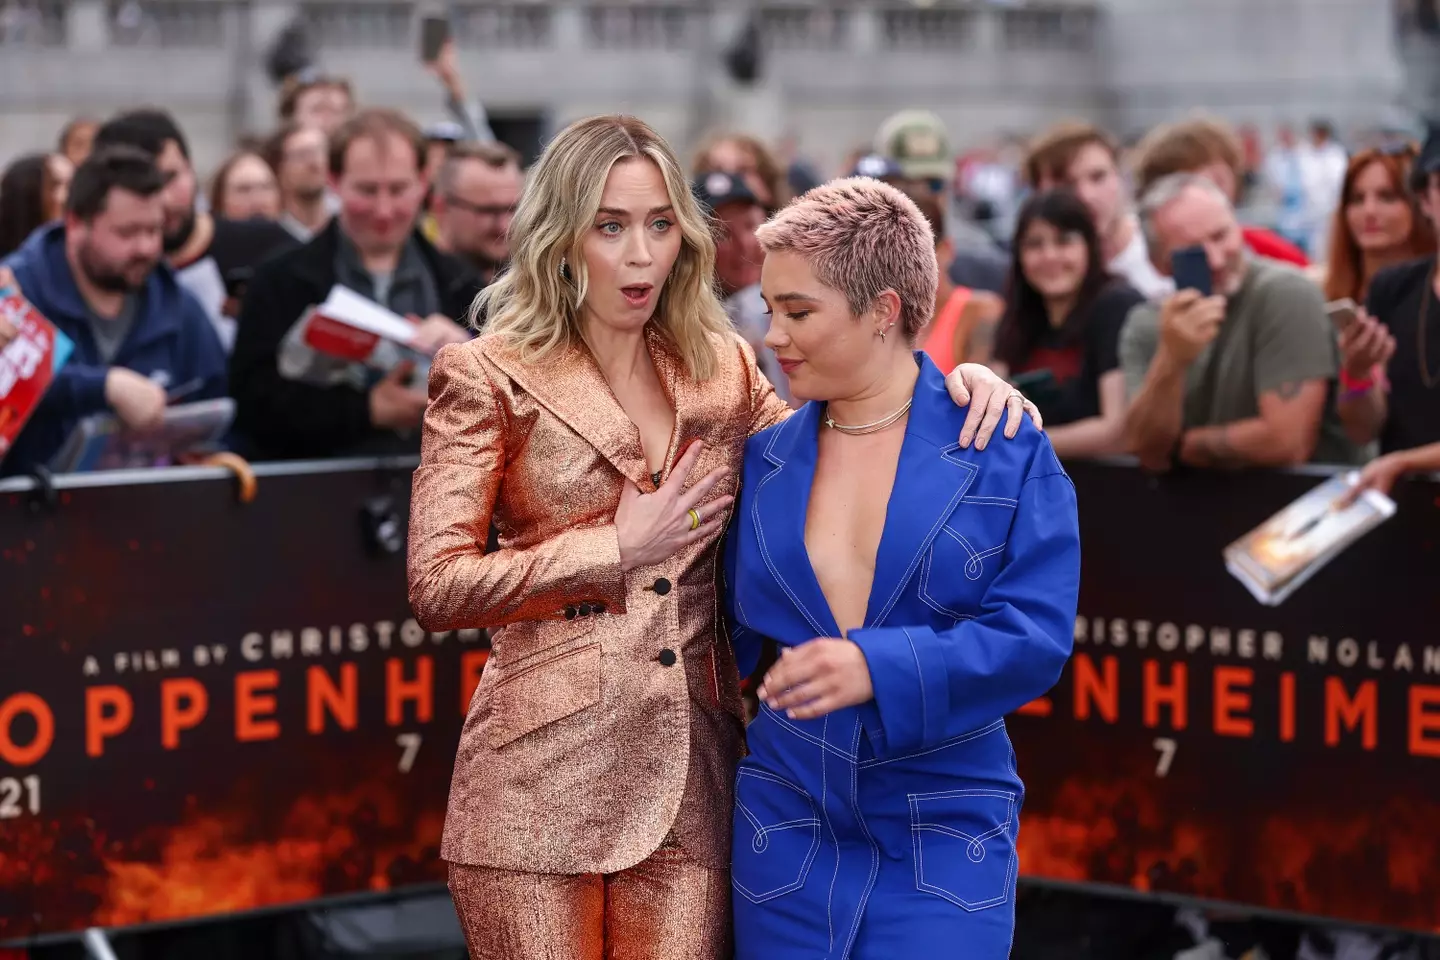 Emily Blunt had a bit of a wardrobe malfunction during the premiere of Oppenheimer.